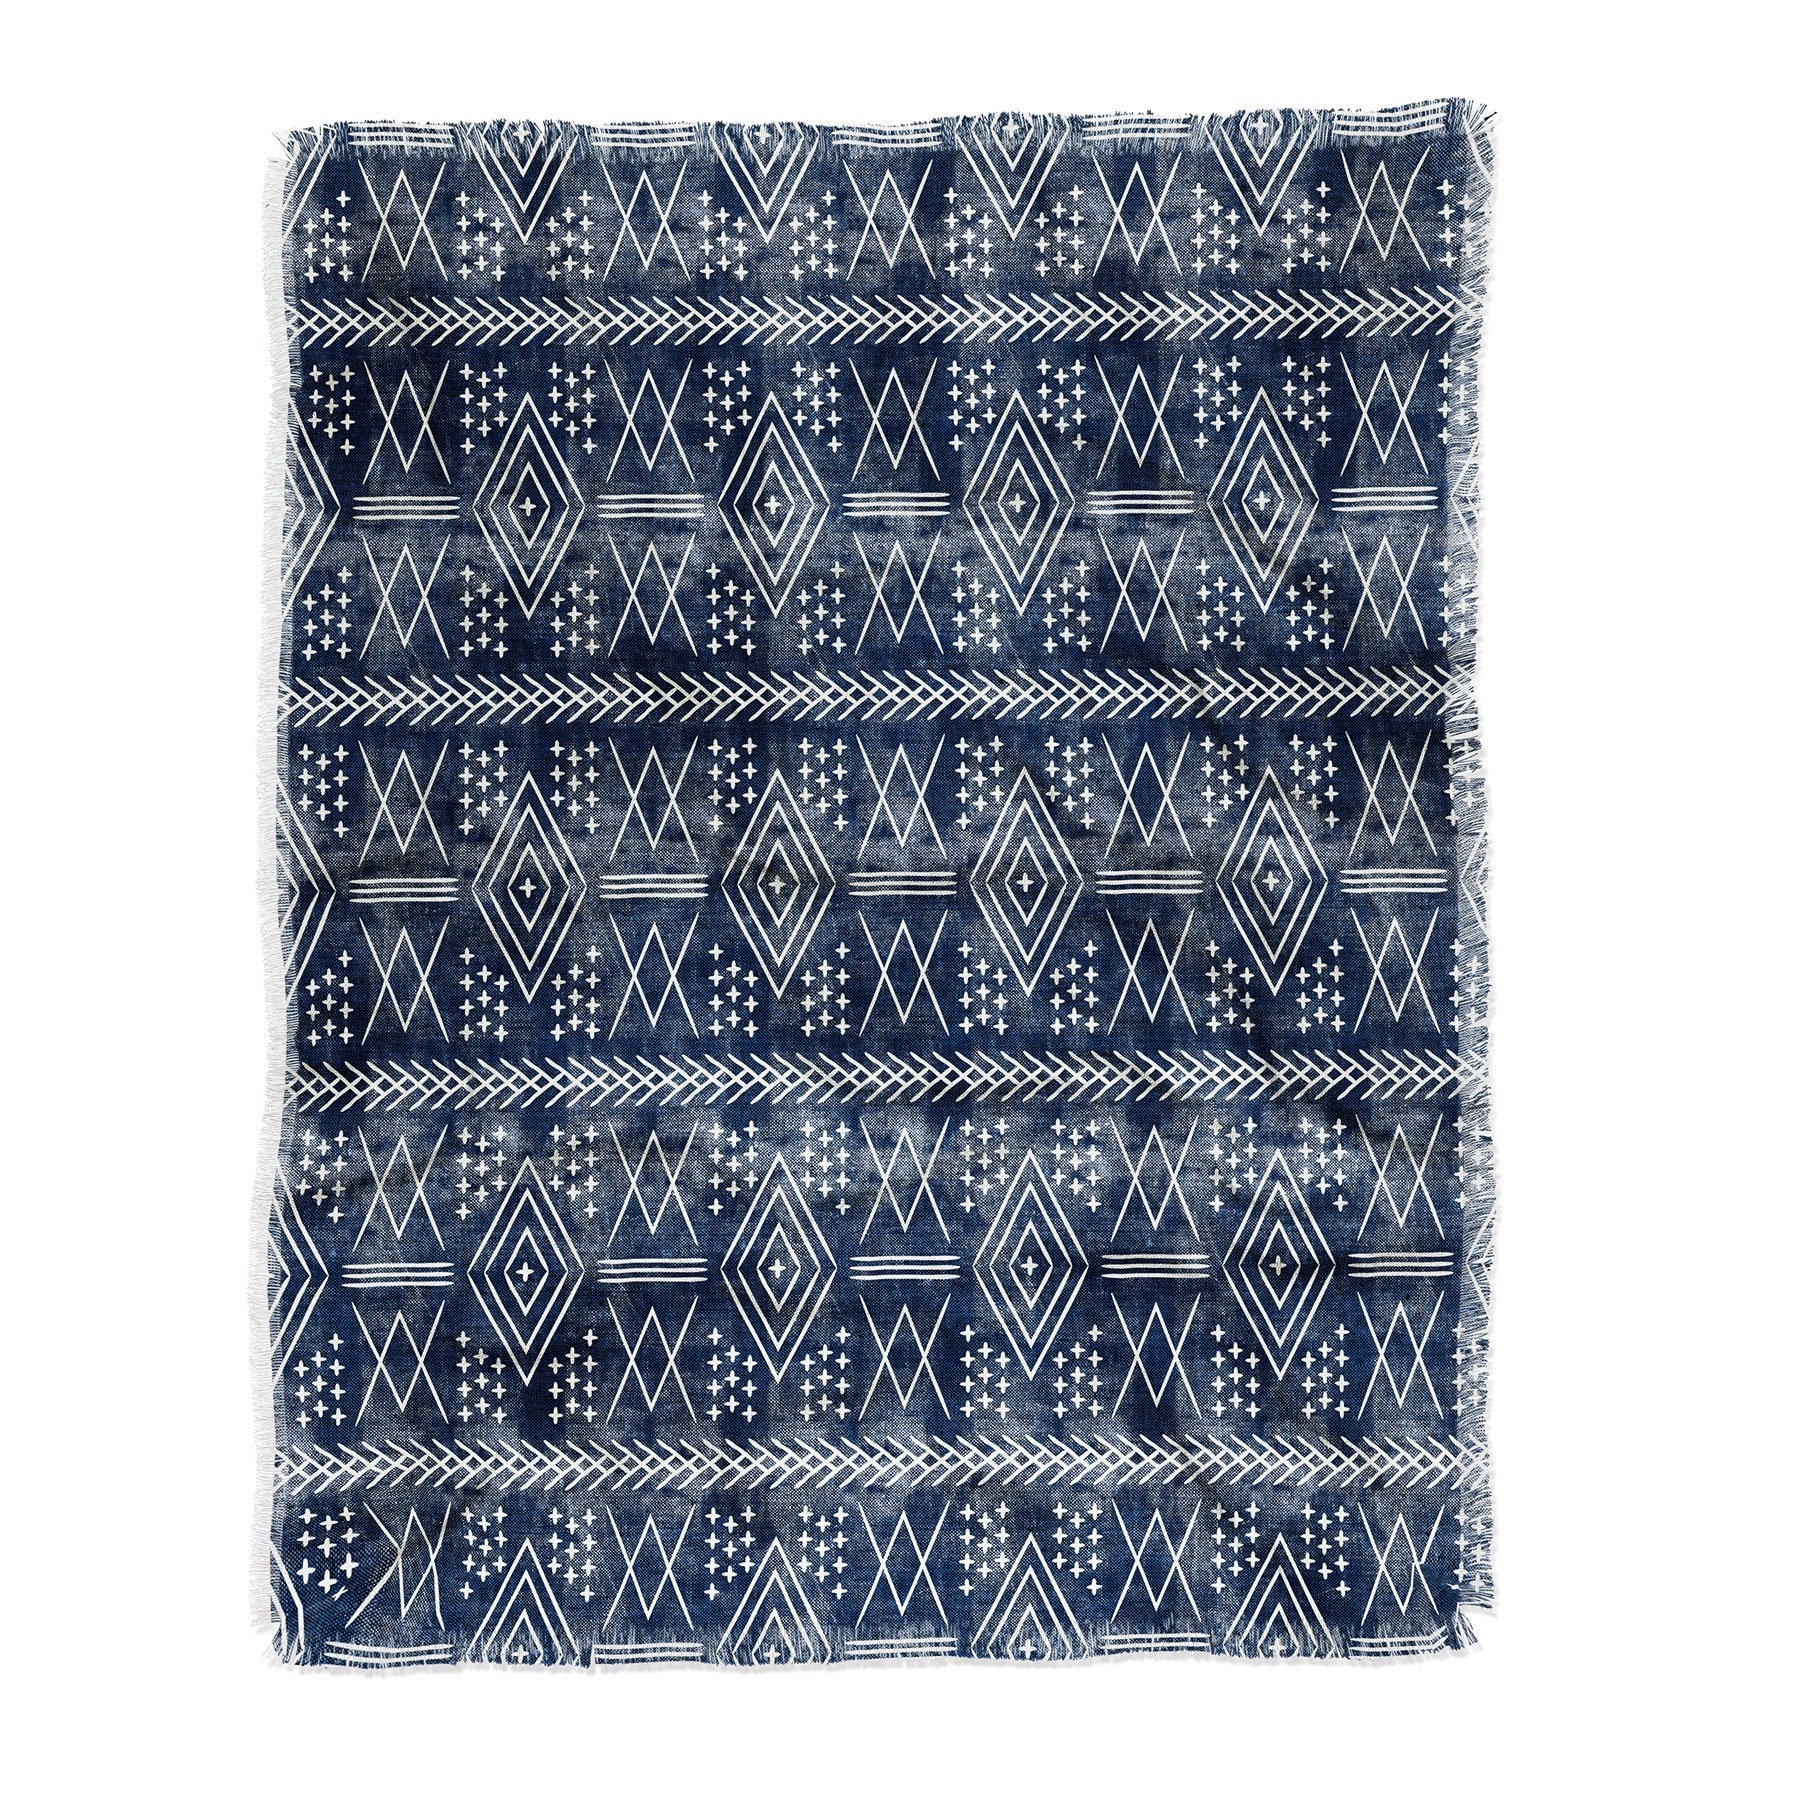 VINTAGE MOROCCAN ON BLUE  BY LITTLE ARROW DESIGN CO - Image 0